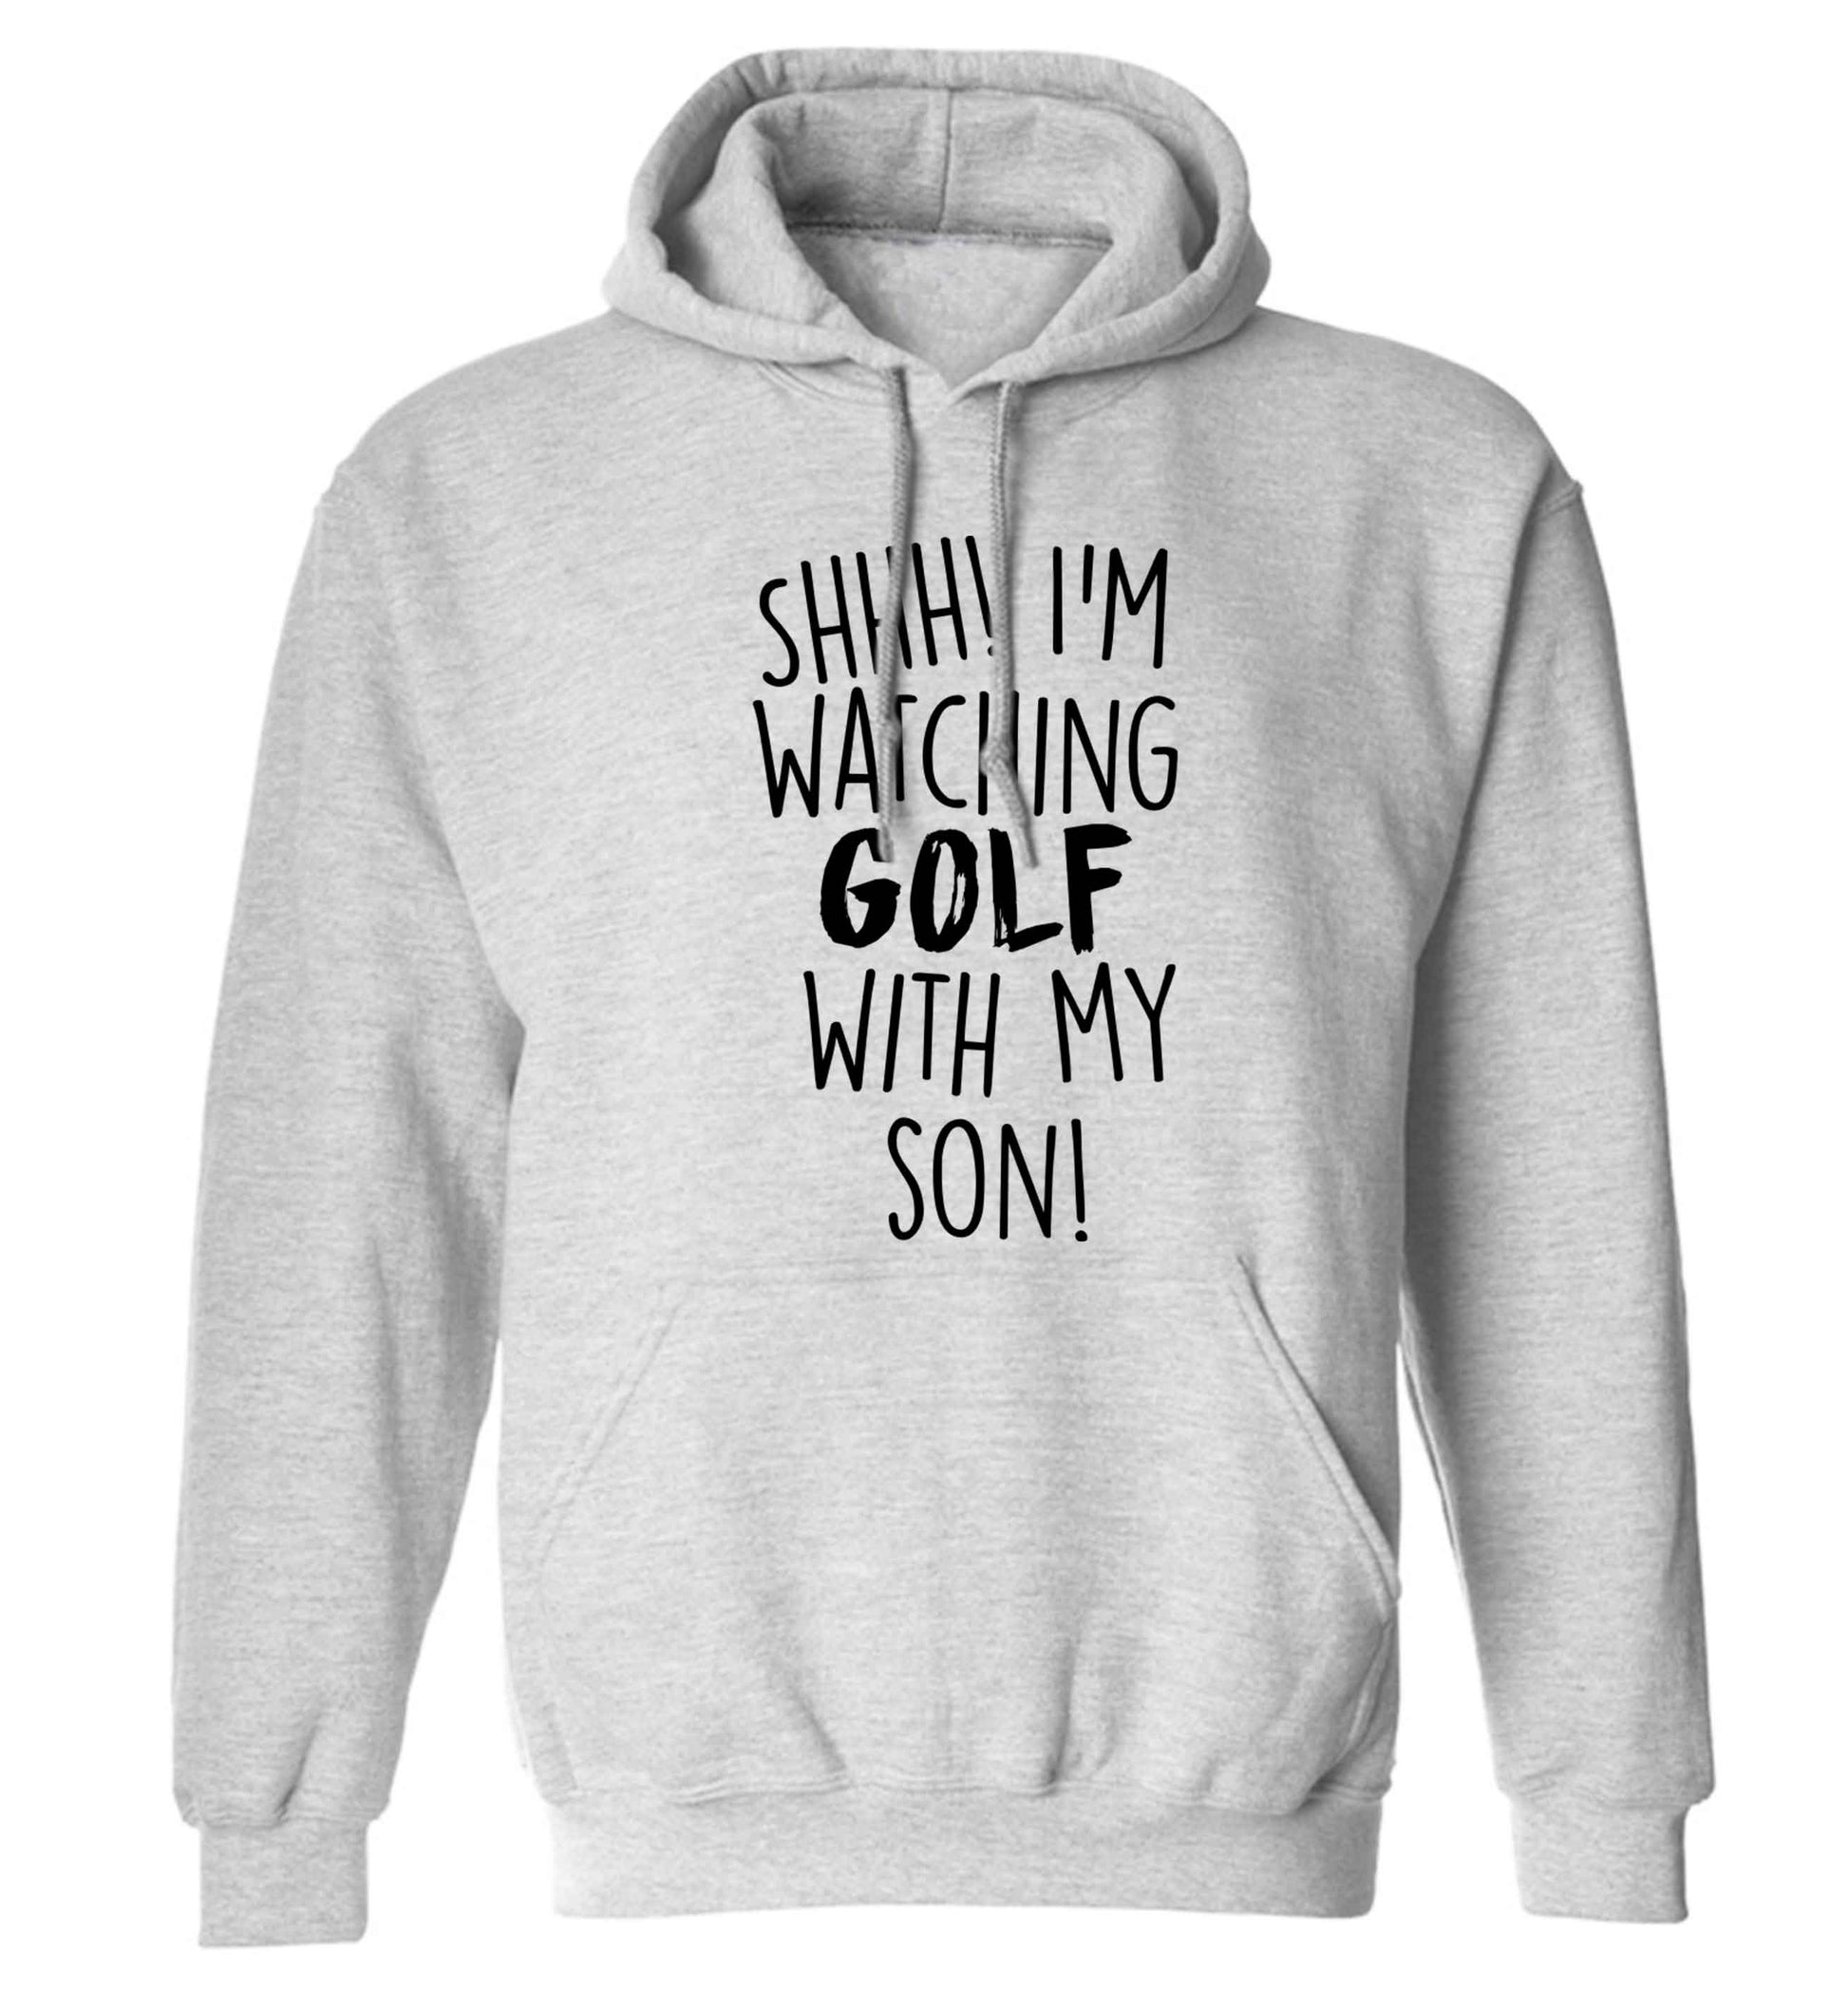 Shh I'm watching golf with my son adults unisex grey hoodie 2XL